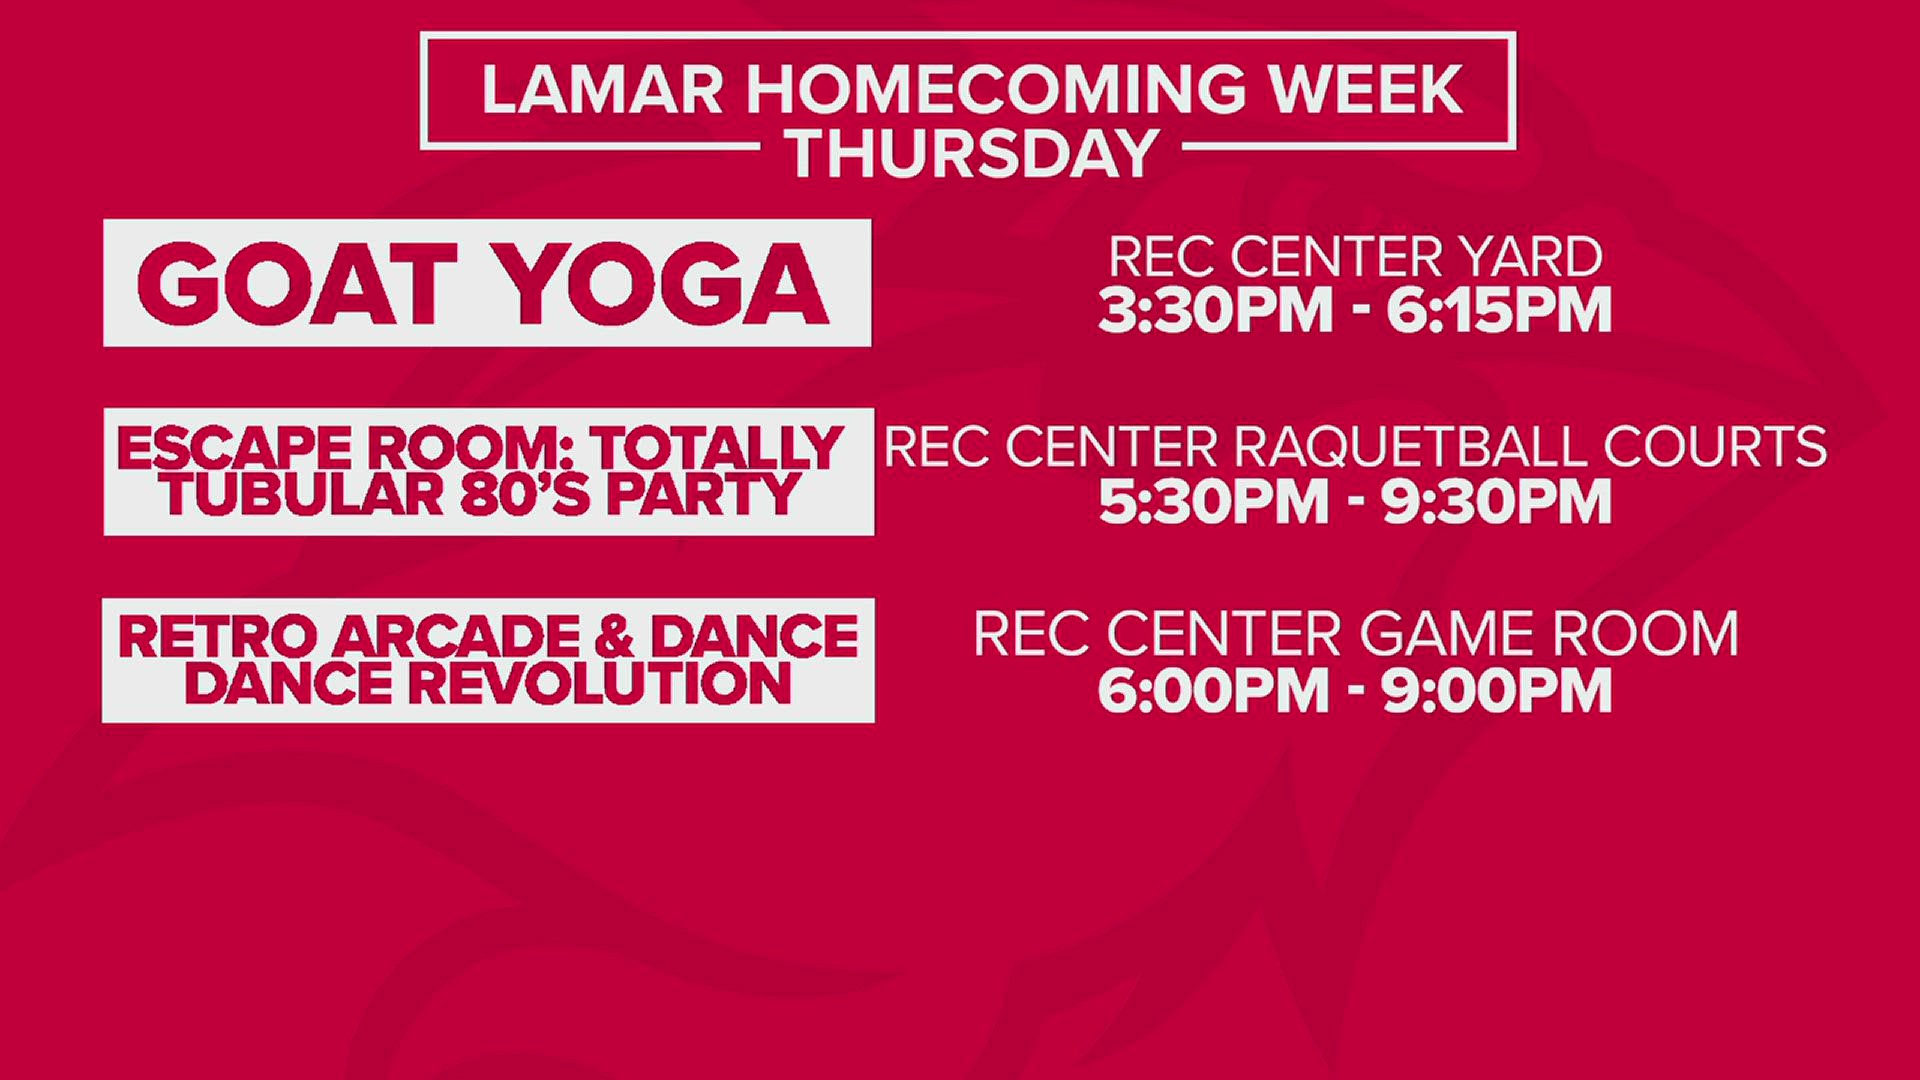 Lamar University has many fun-filled events planned for Homecoming week.